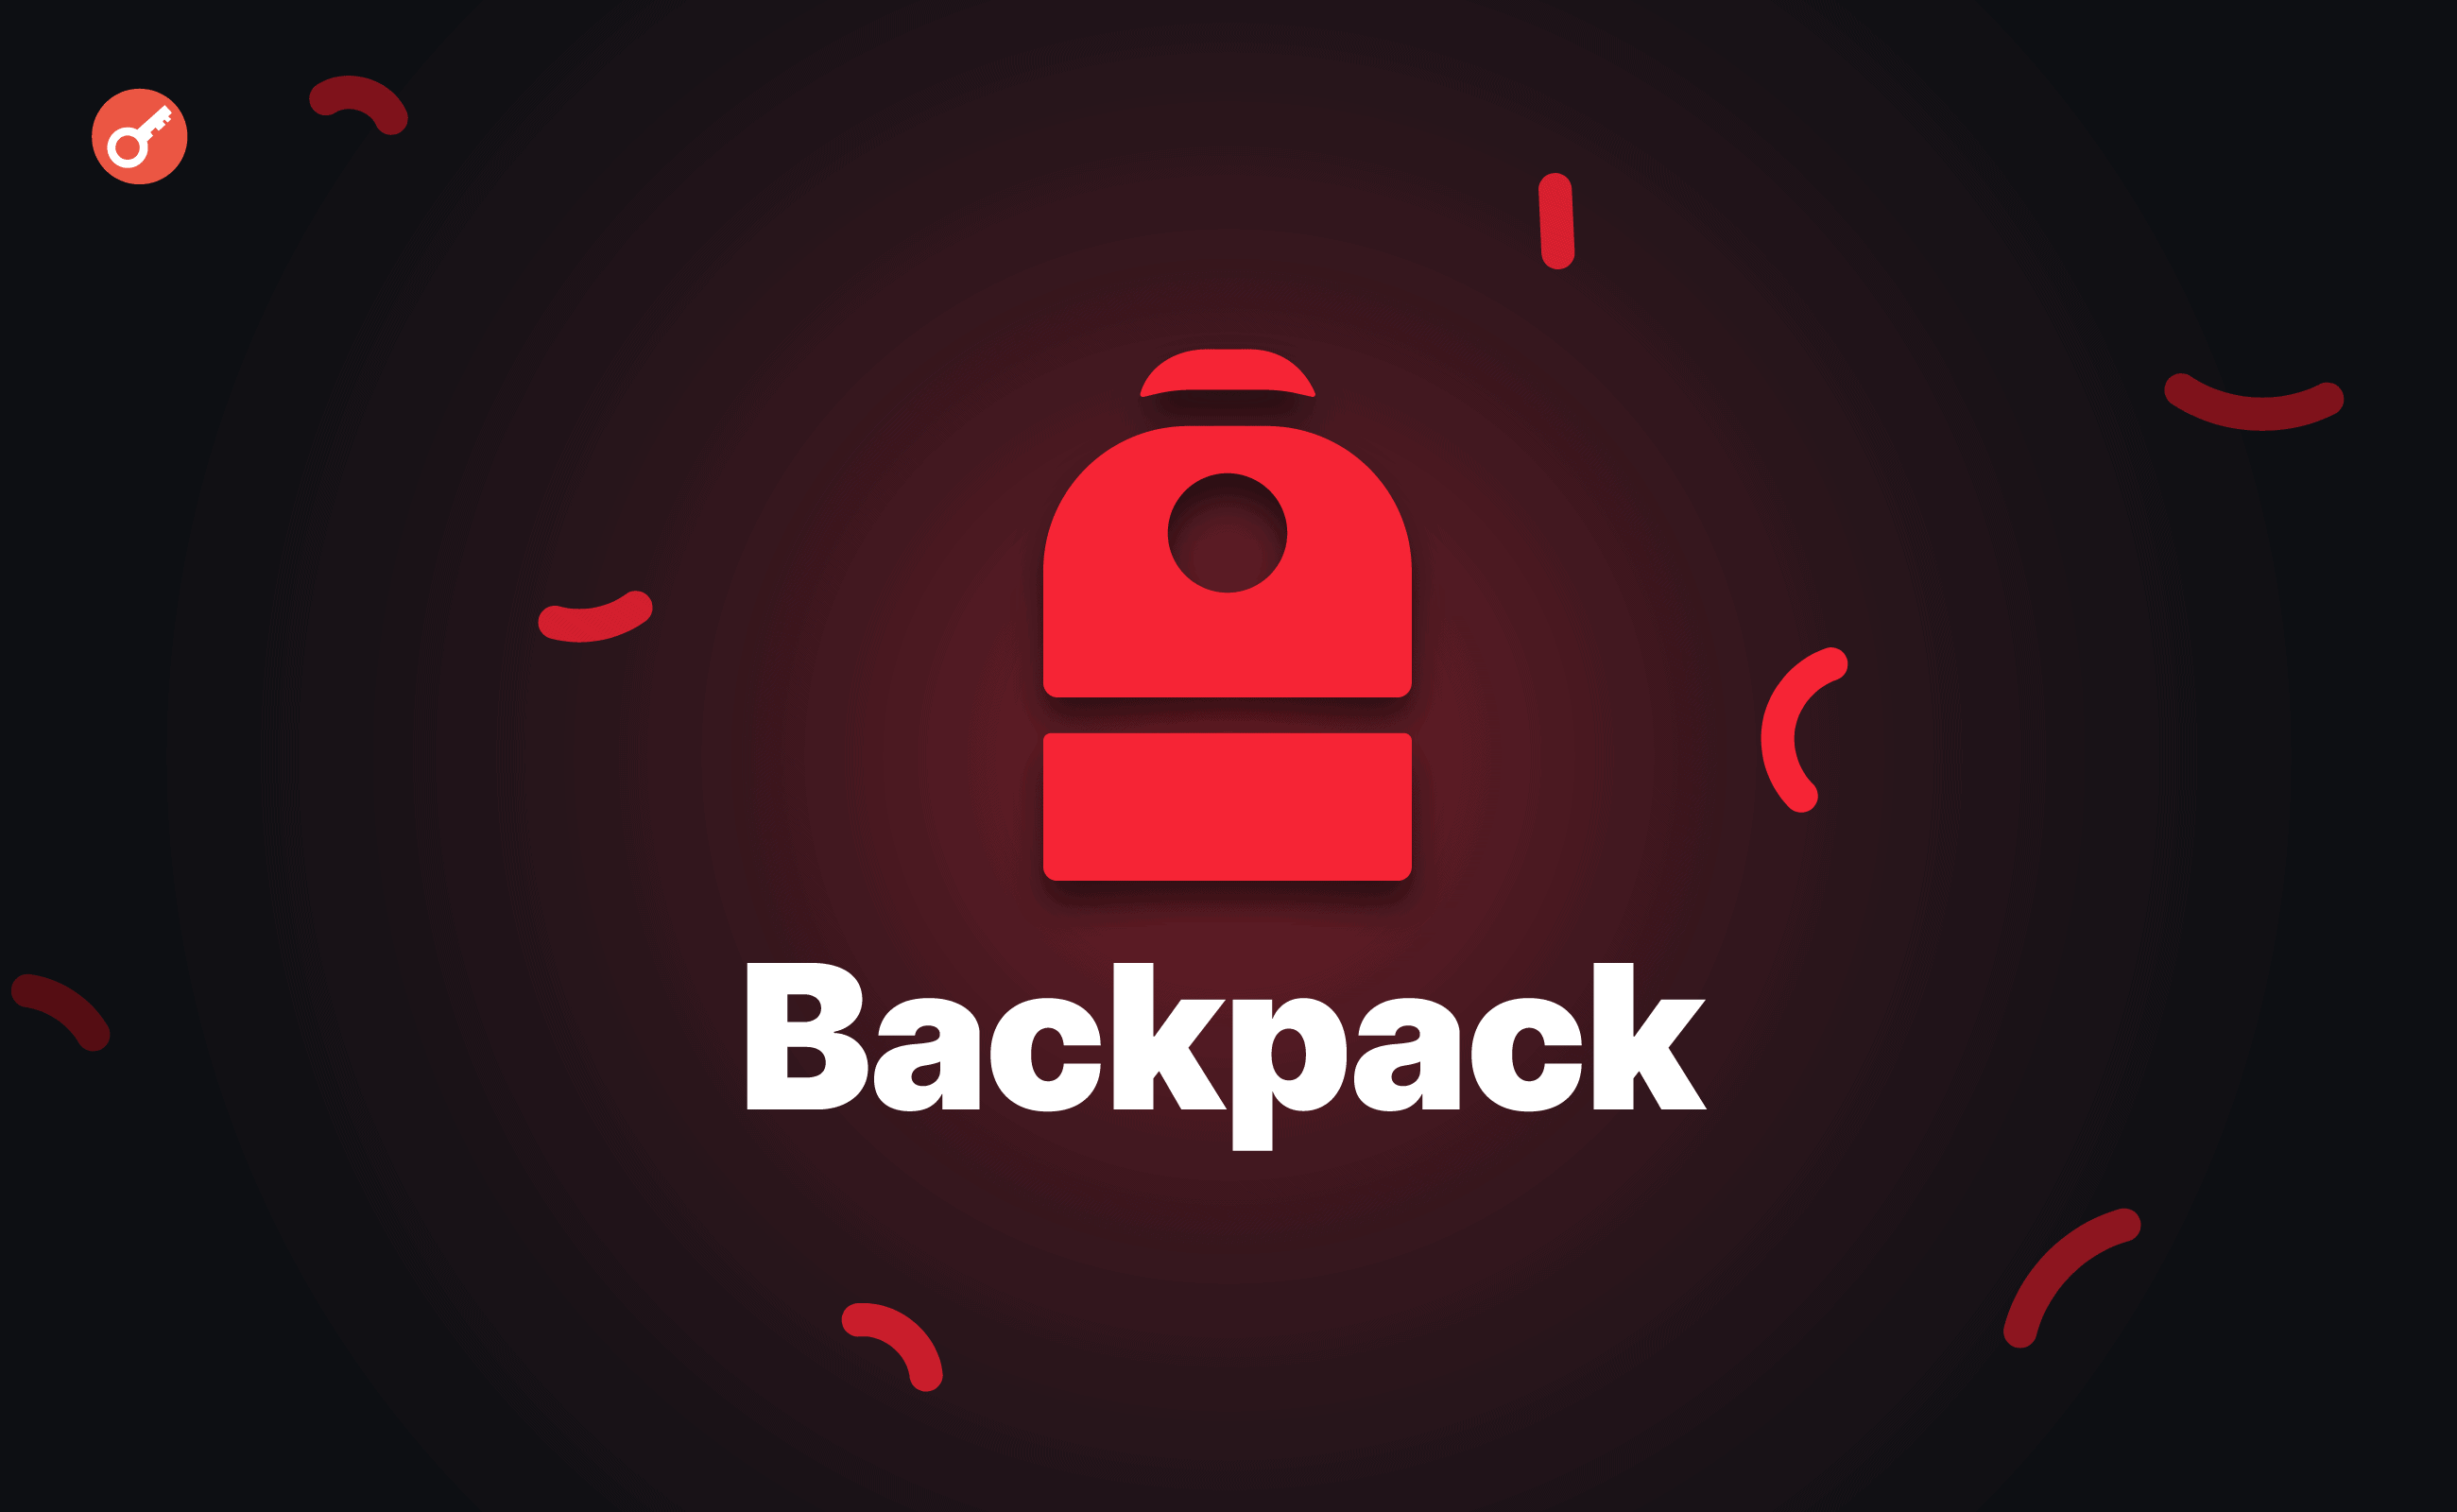 Backpack — activity in the project with an eye to drop. Заглавный коллаж статьи.